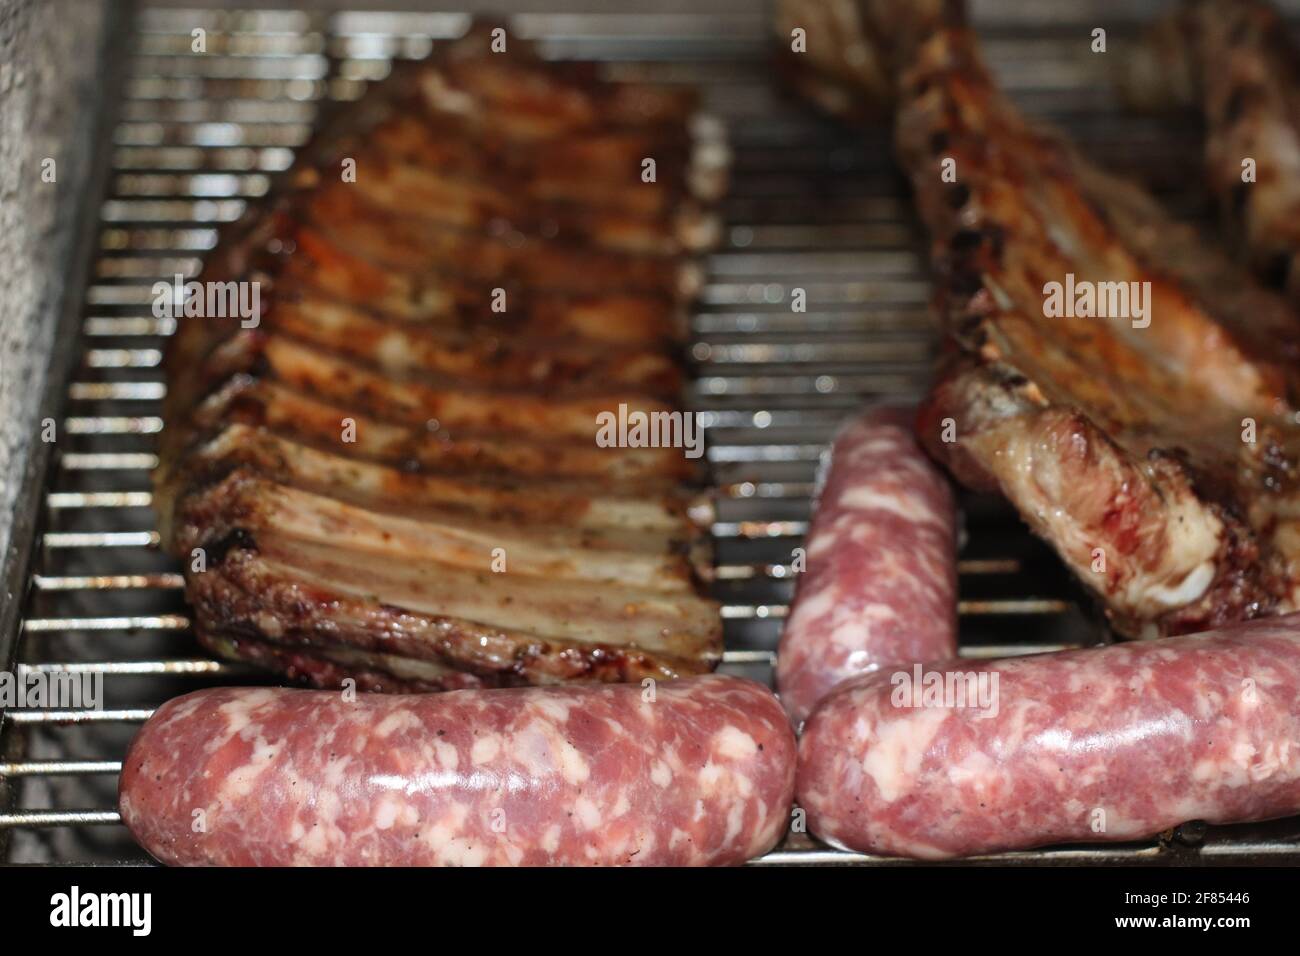 Mixed meat with ribs of beef and sausage on the grill Stock Photo